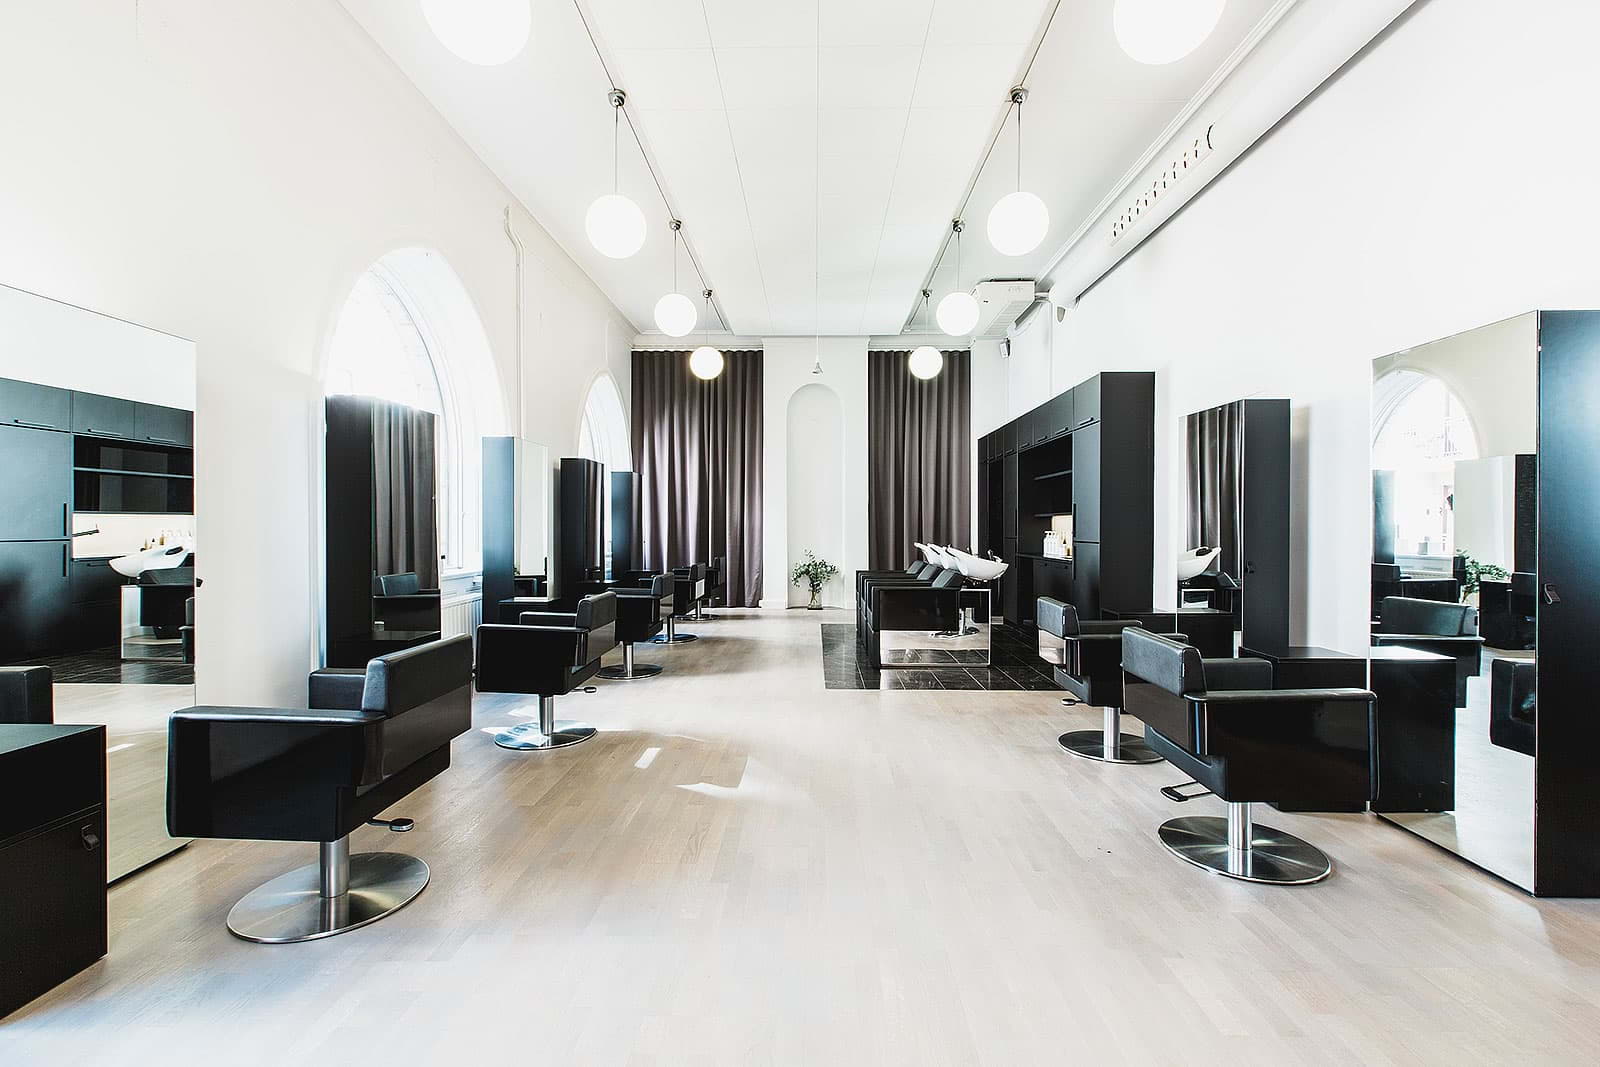 Guide to the best hair salons in London